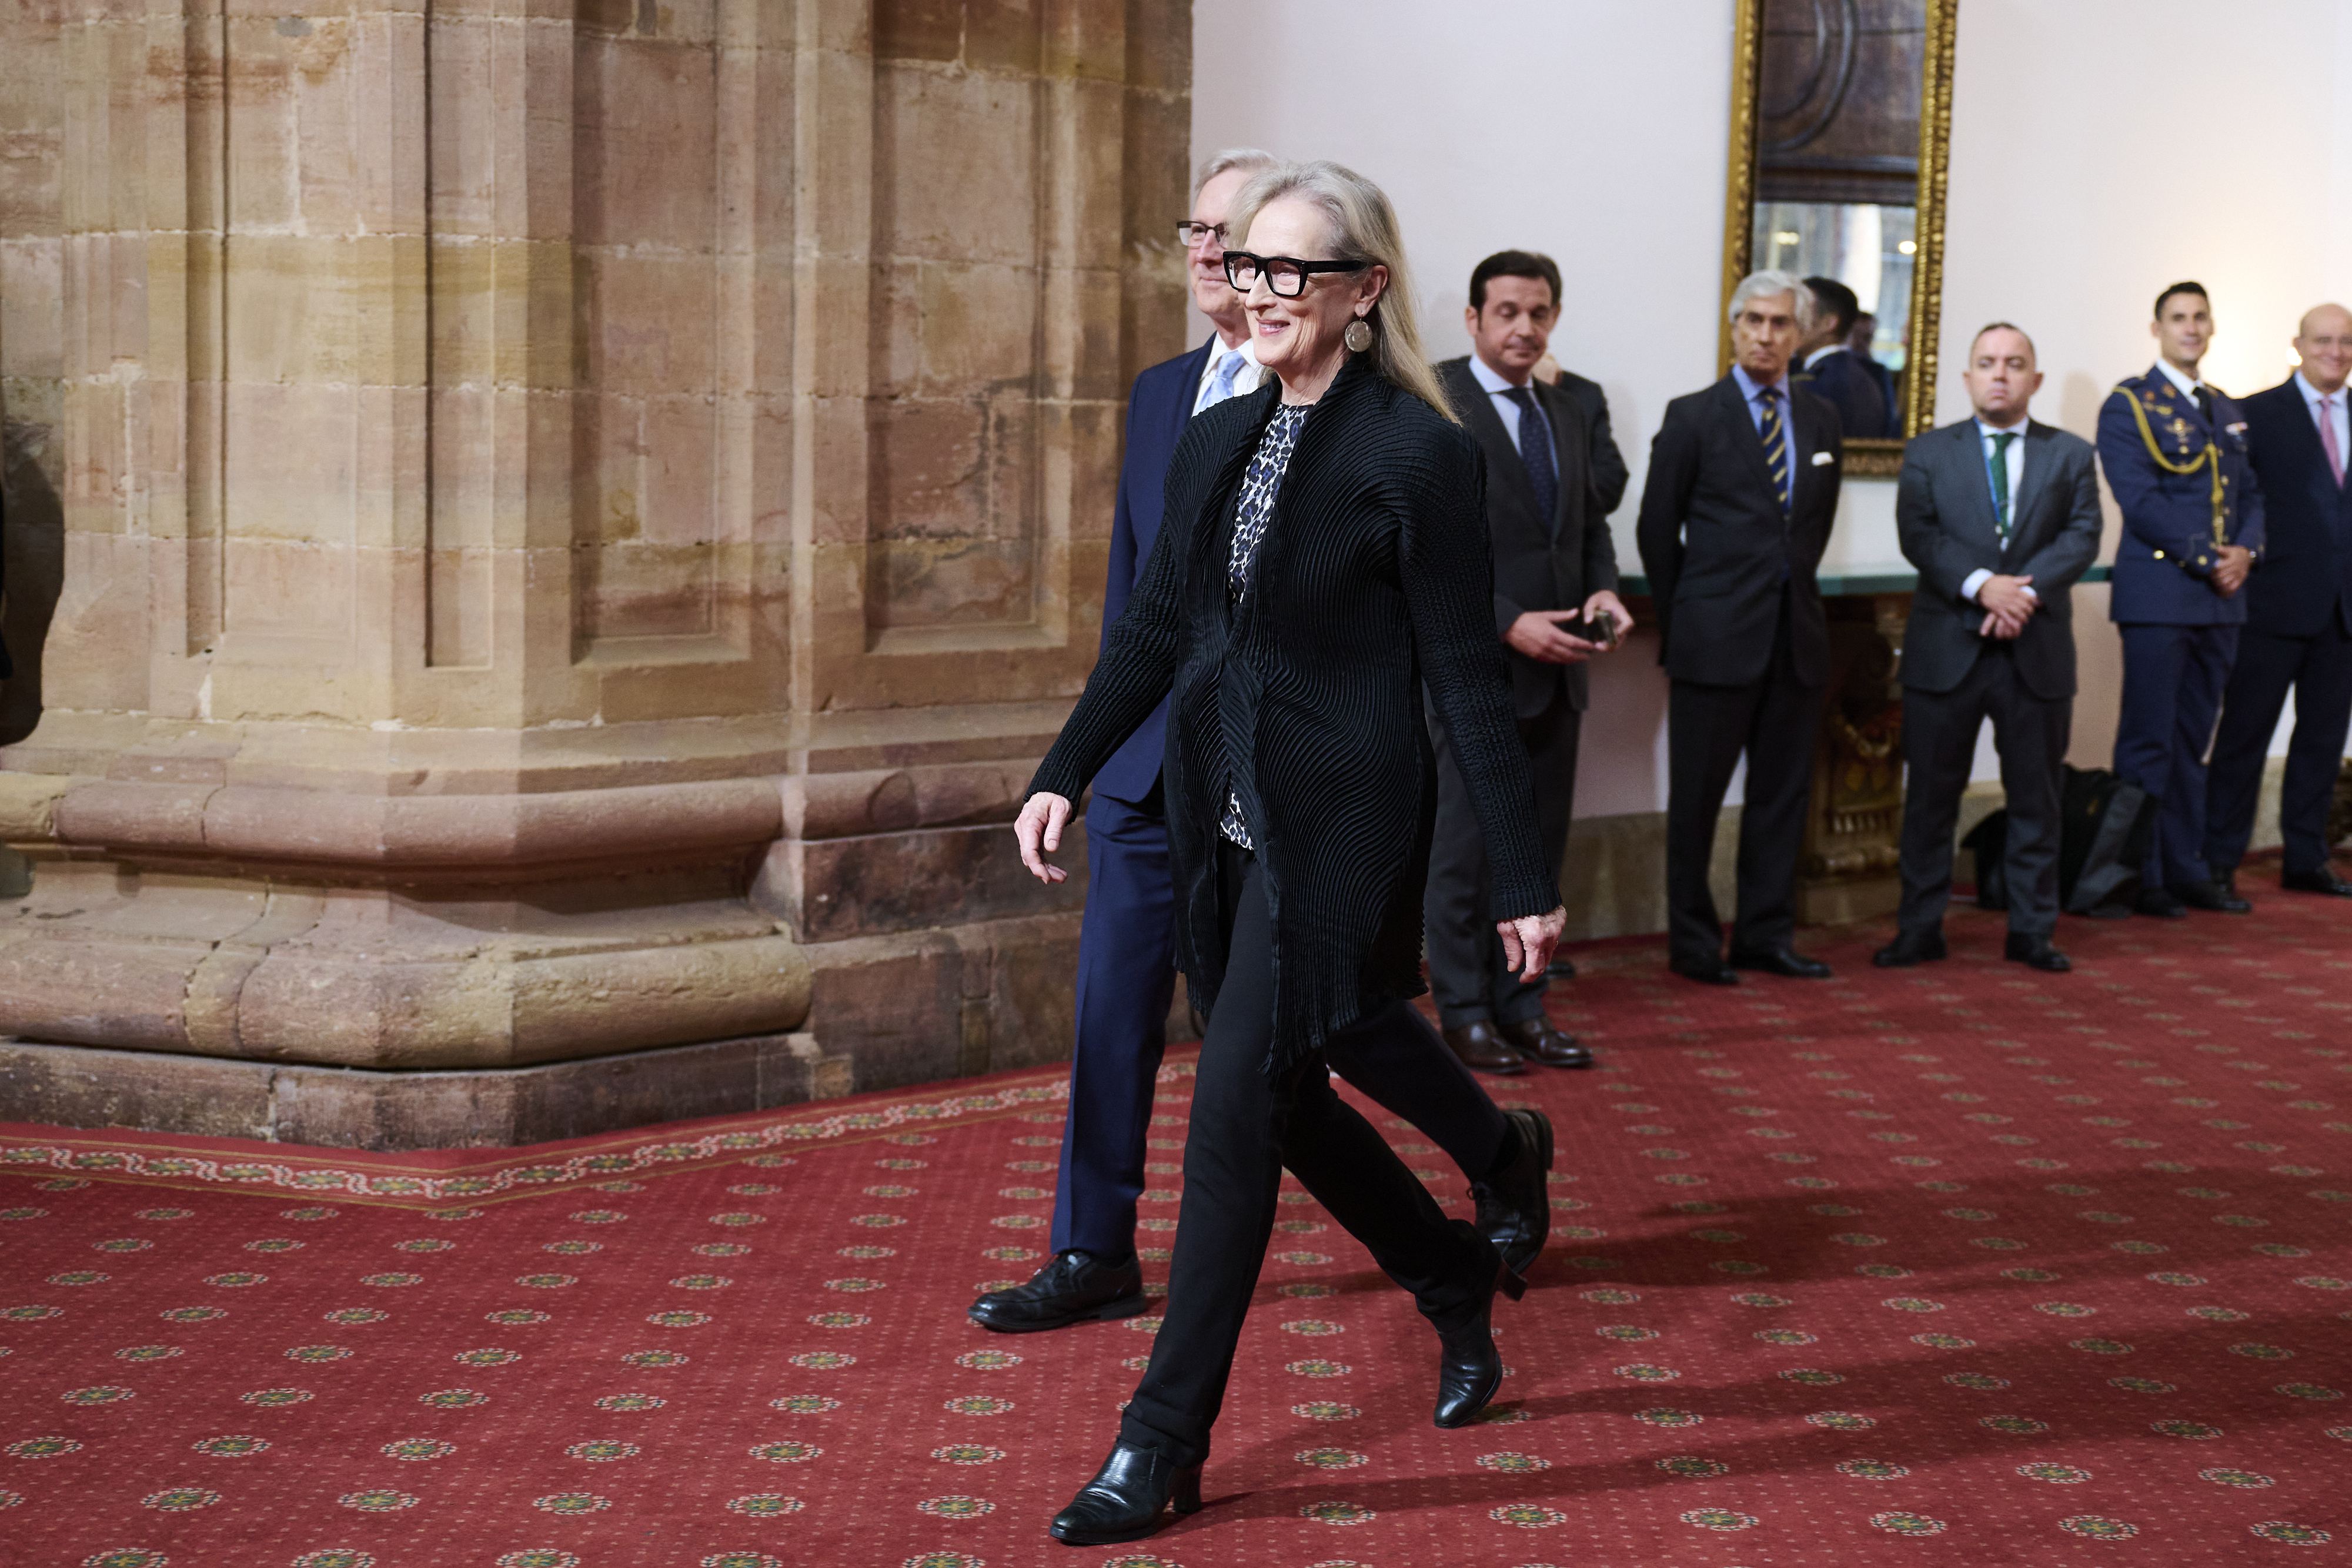 Meryl Streep cut a chic, classic figure in a black power suit